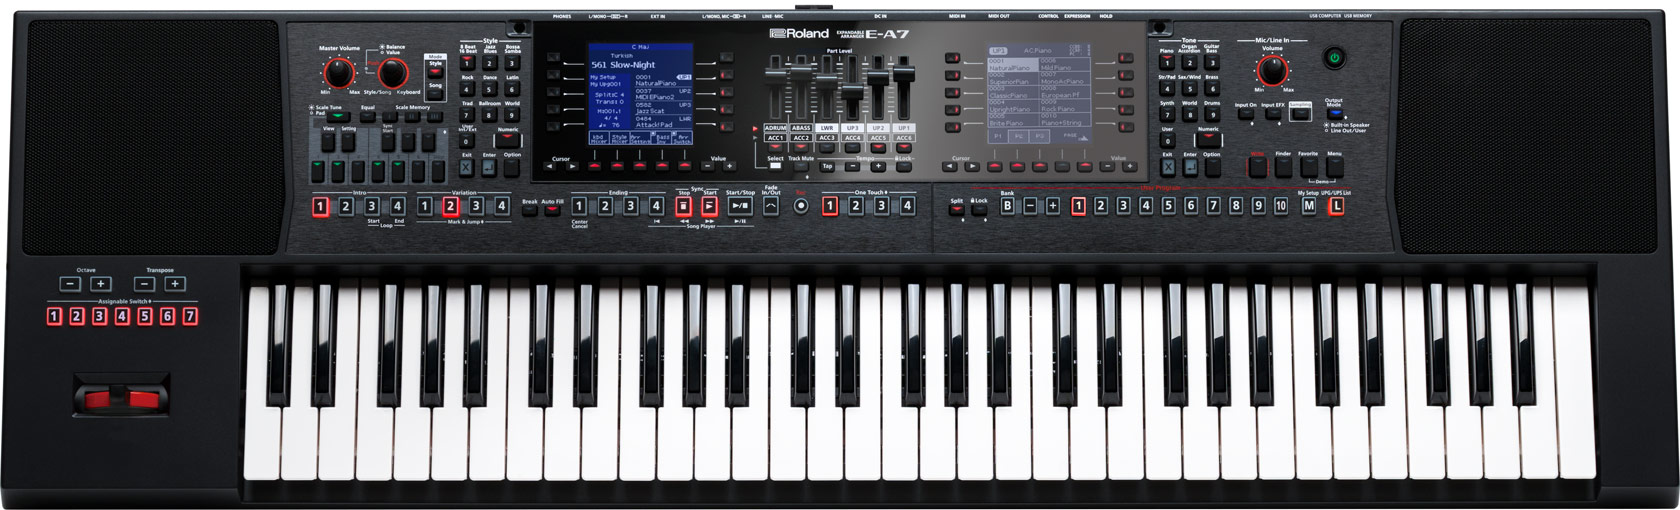 styles roland ea7 download